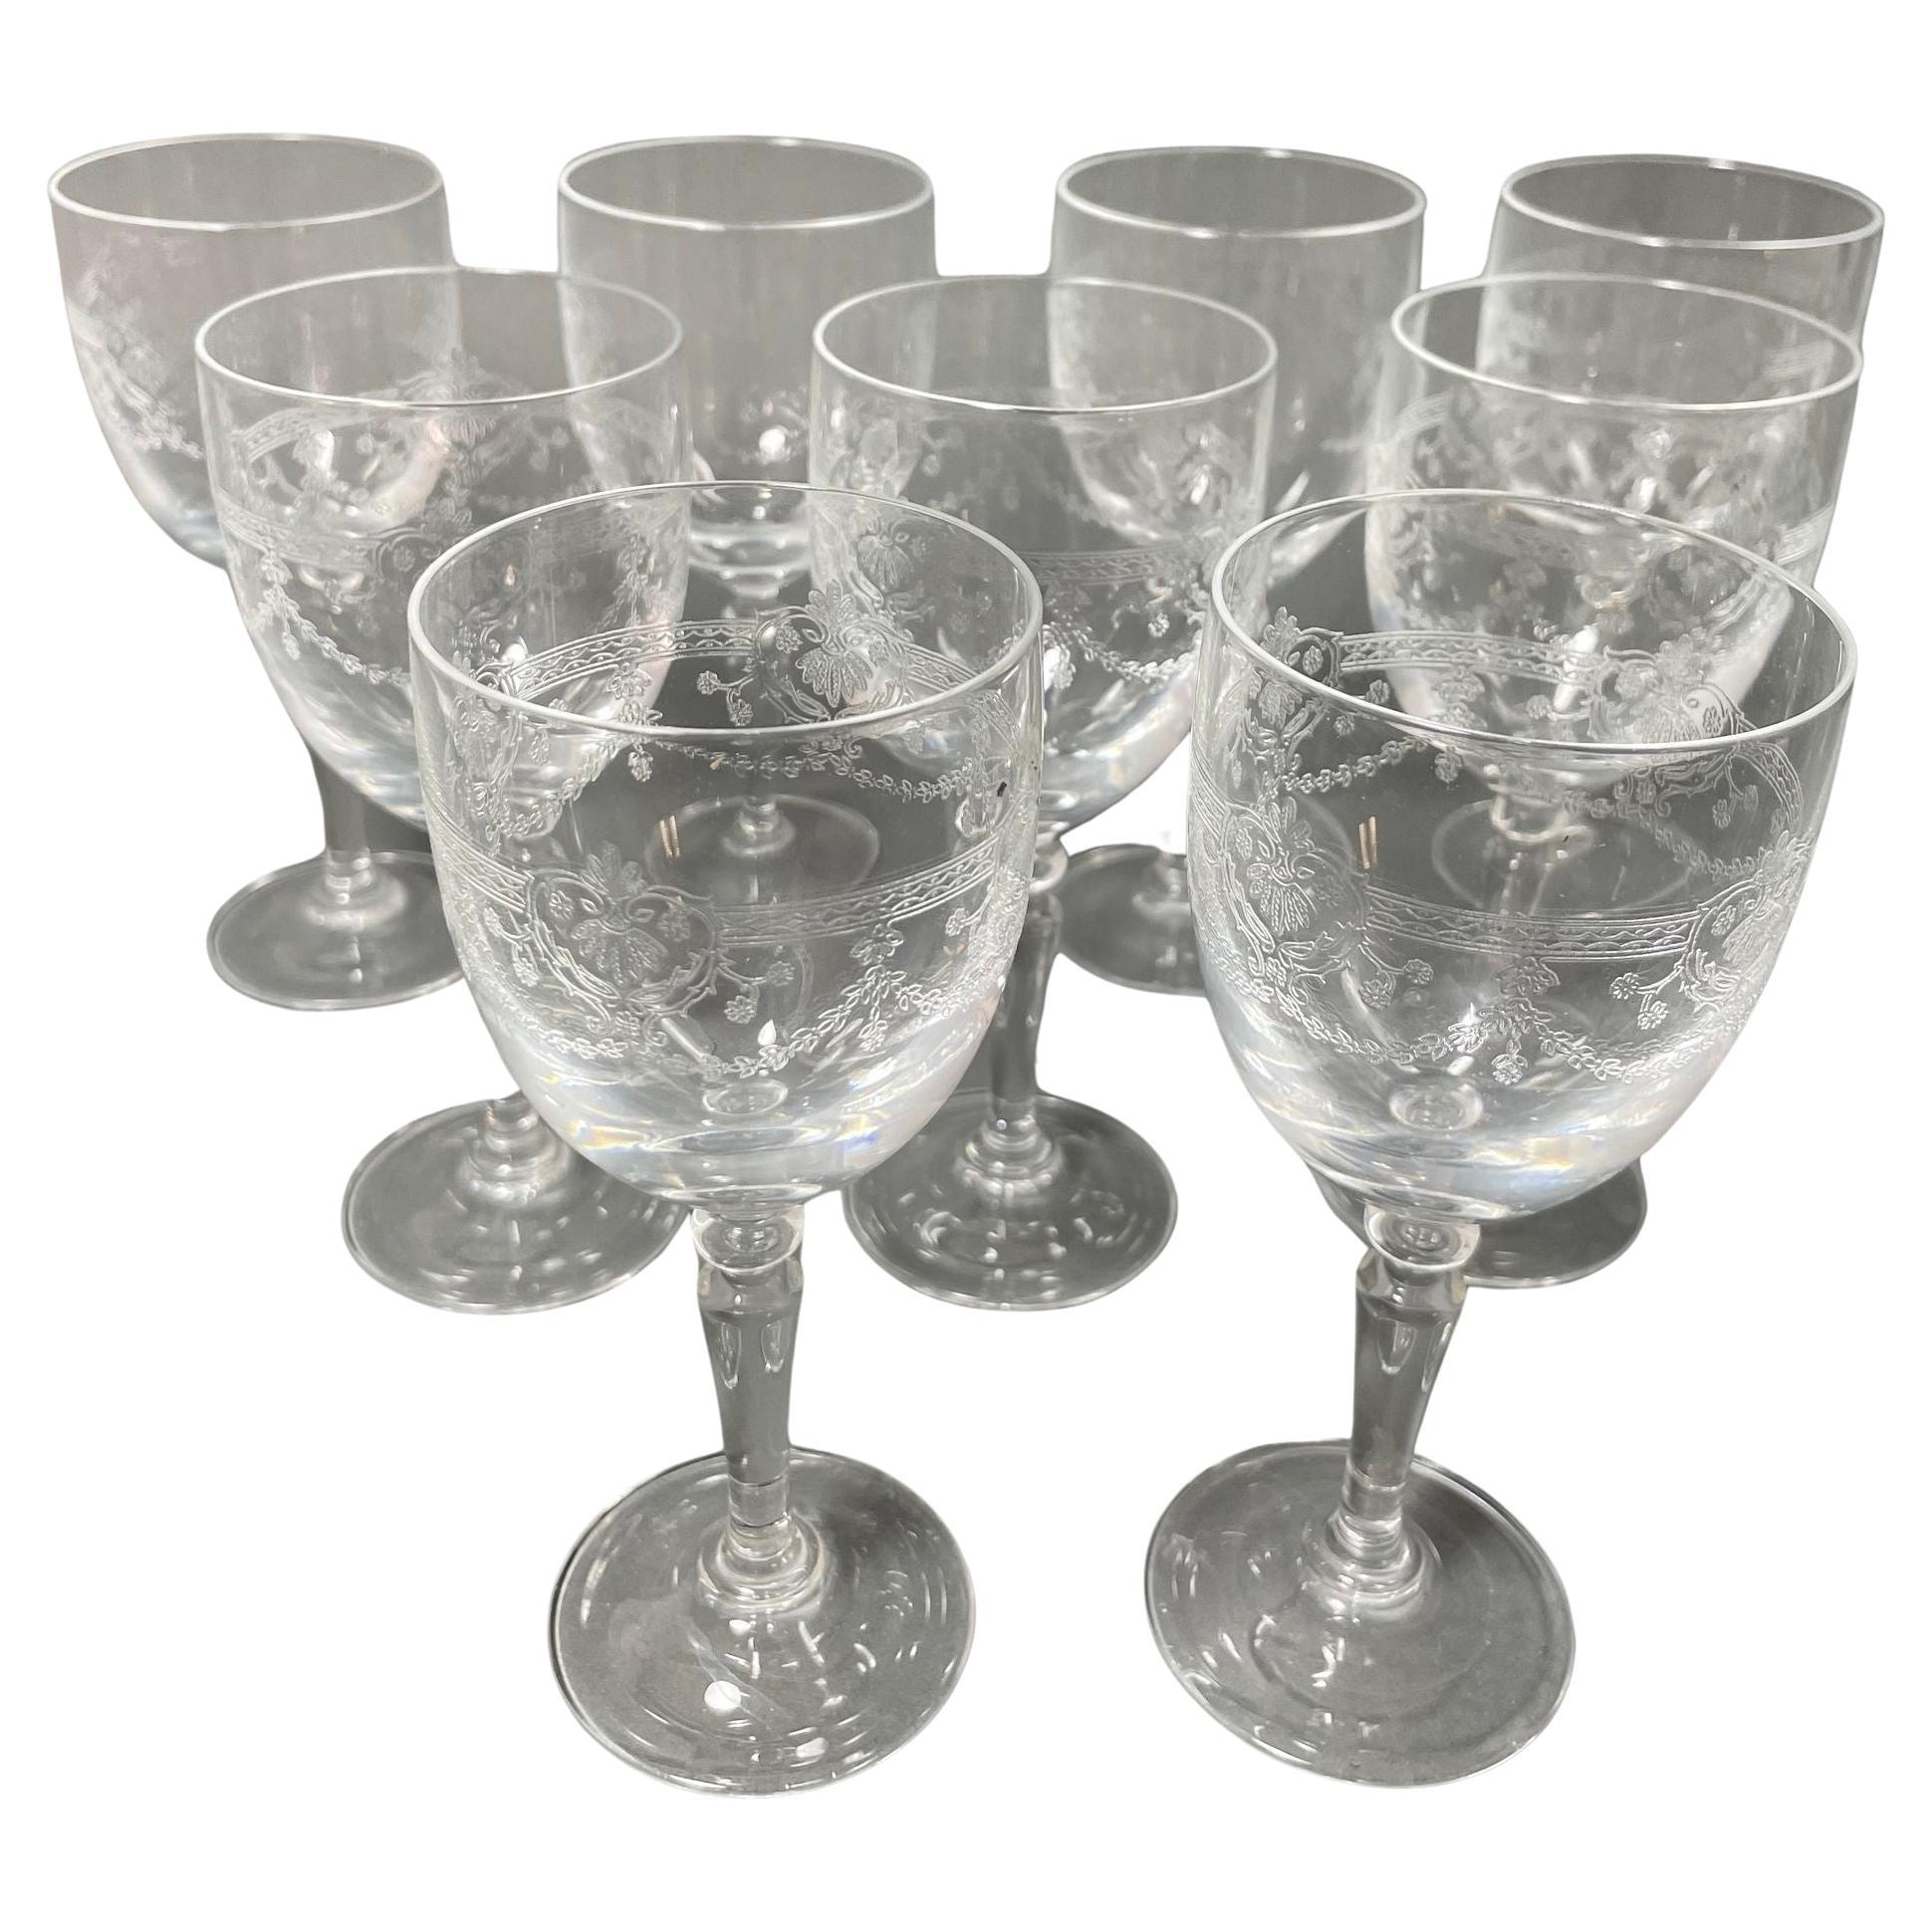 Crystal D'Arques France Dampierre Etched Water Wine Goblets Set of 9